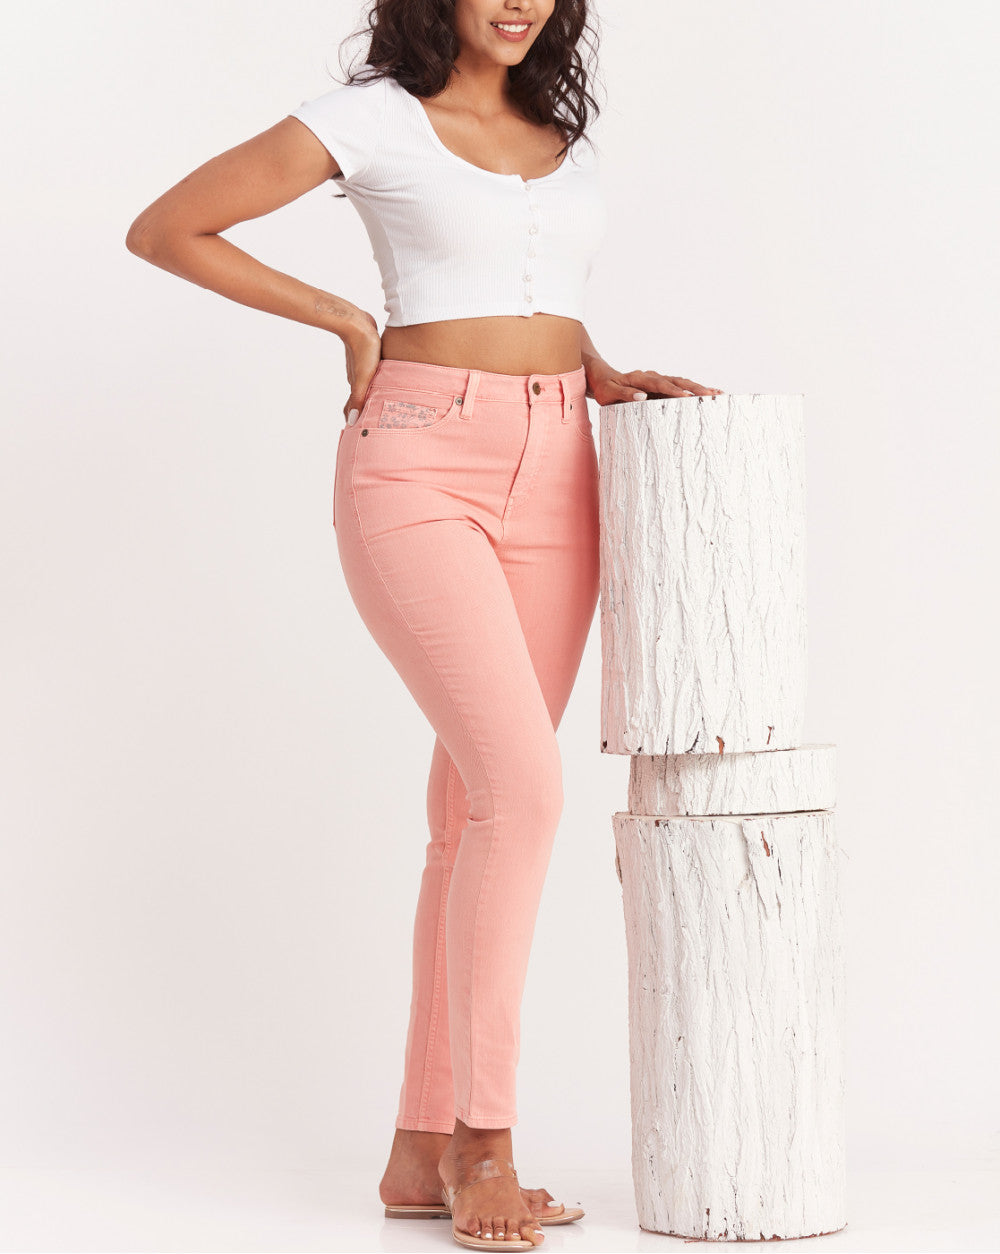 Skinny Fit High Waist Colored Jeans - Coral